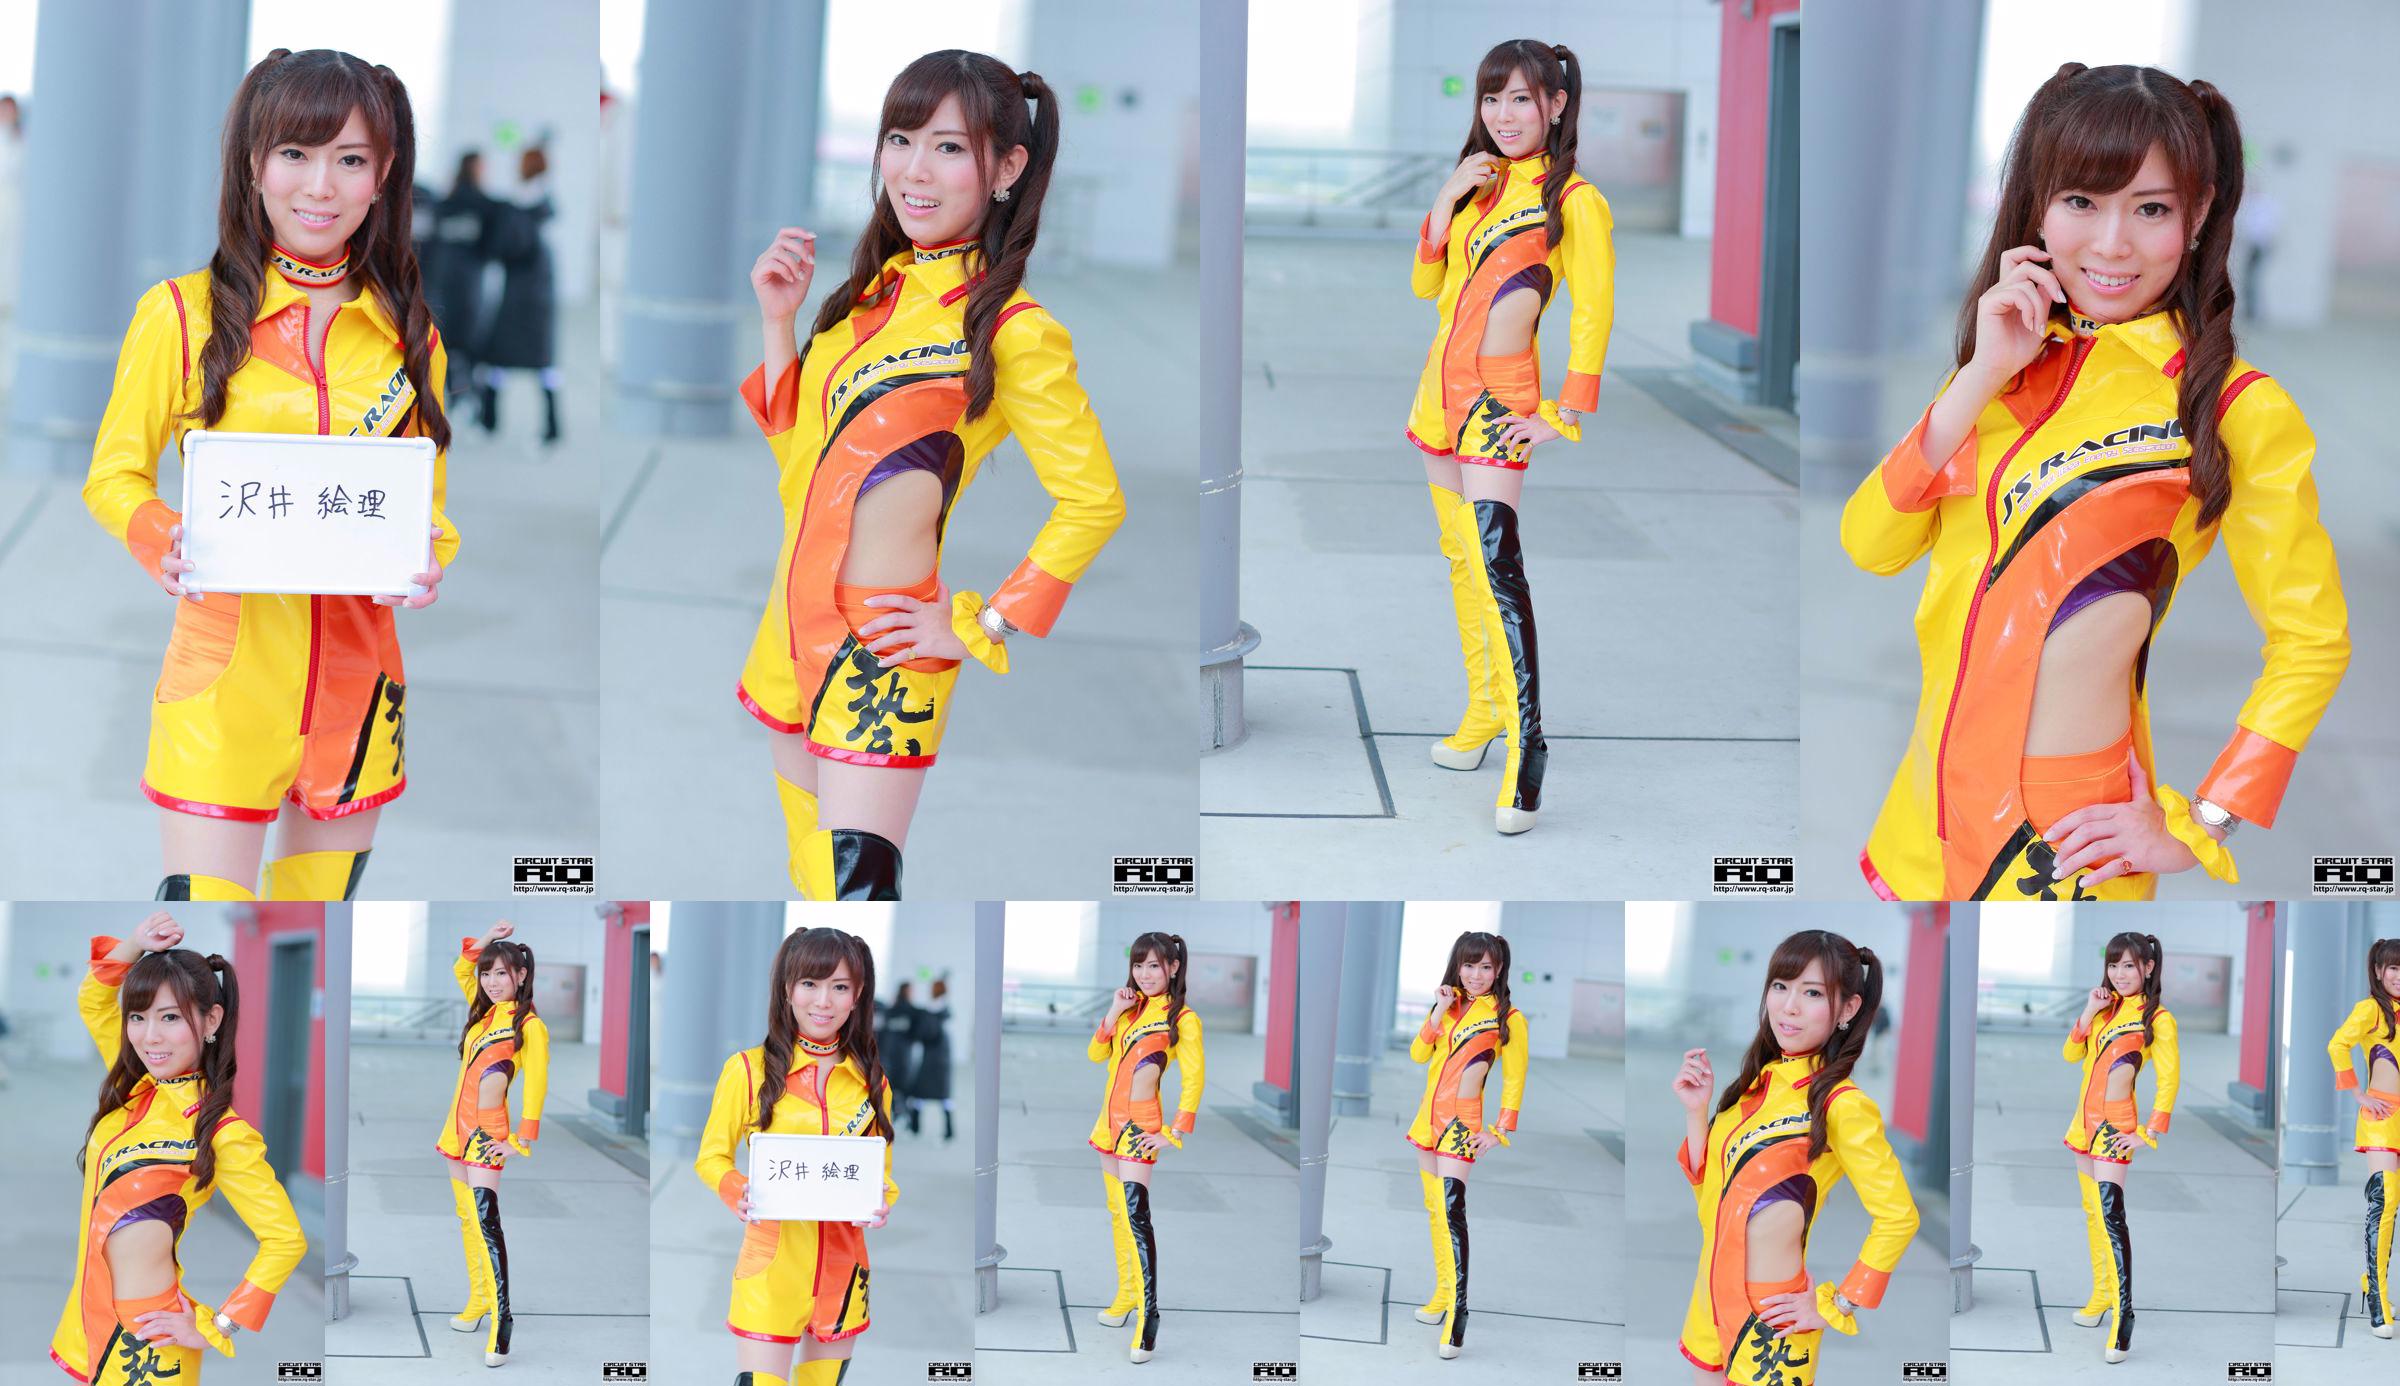 [RQ-STAR] NO.00742 Chihiro Ando Race Queen Race Queen No.9b708c Page 4